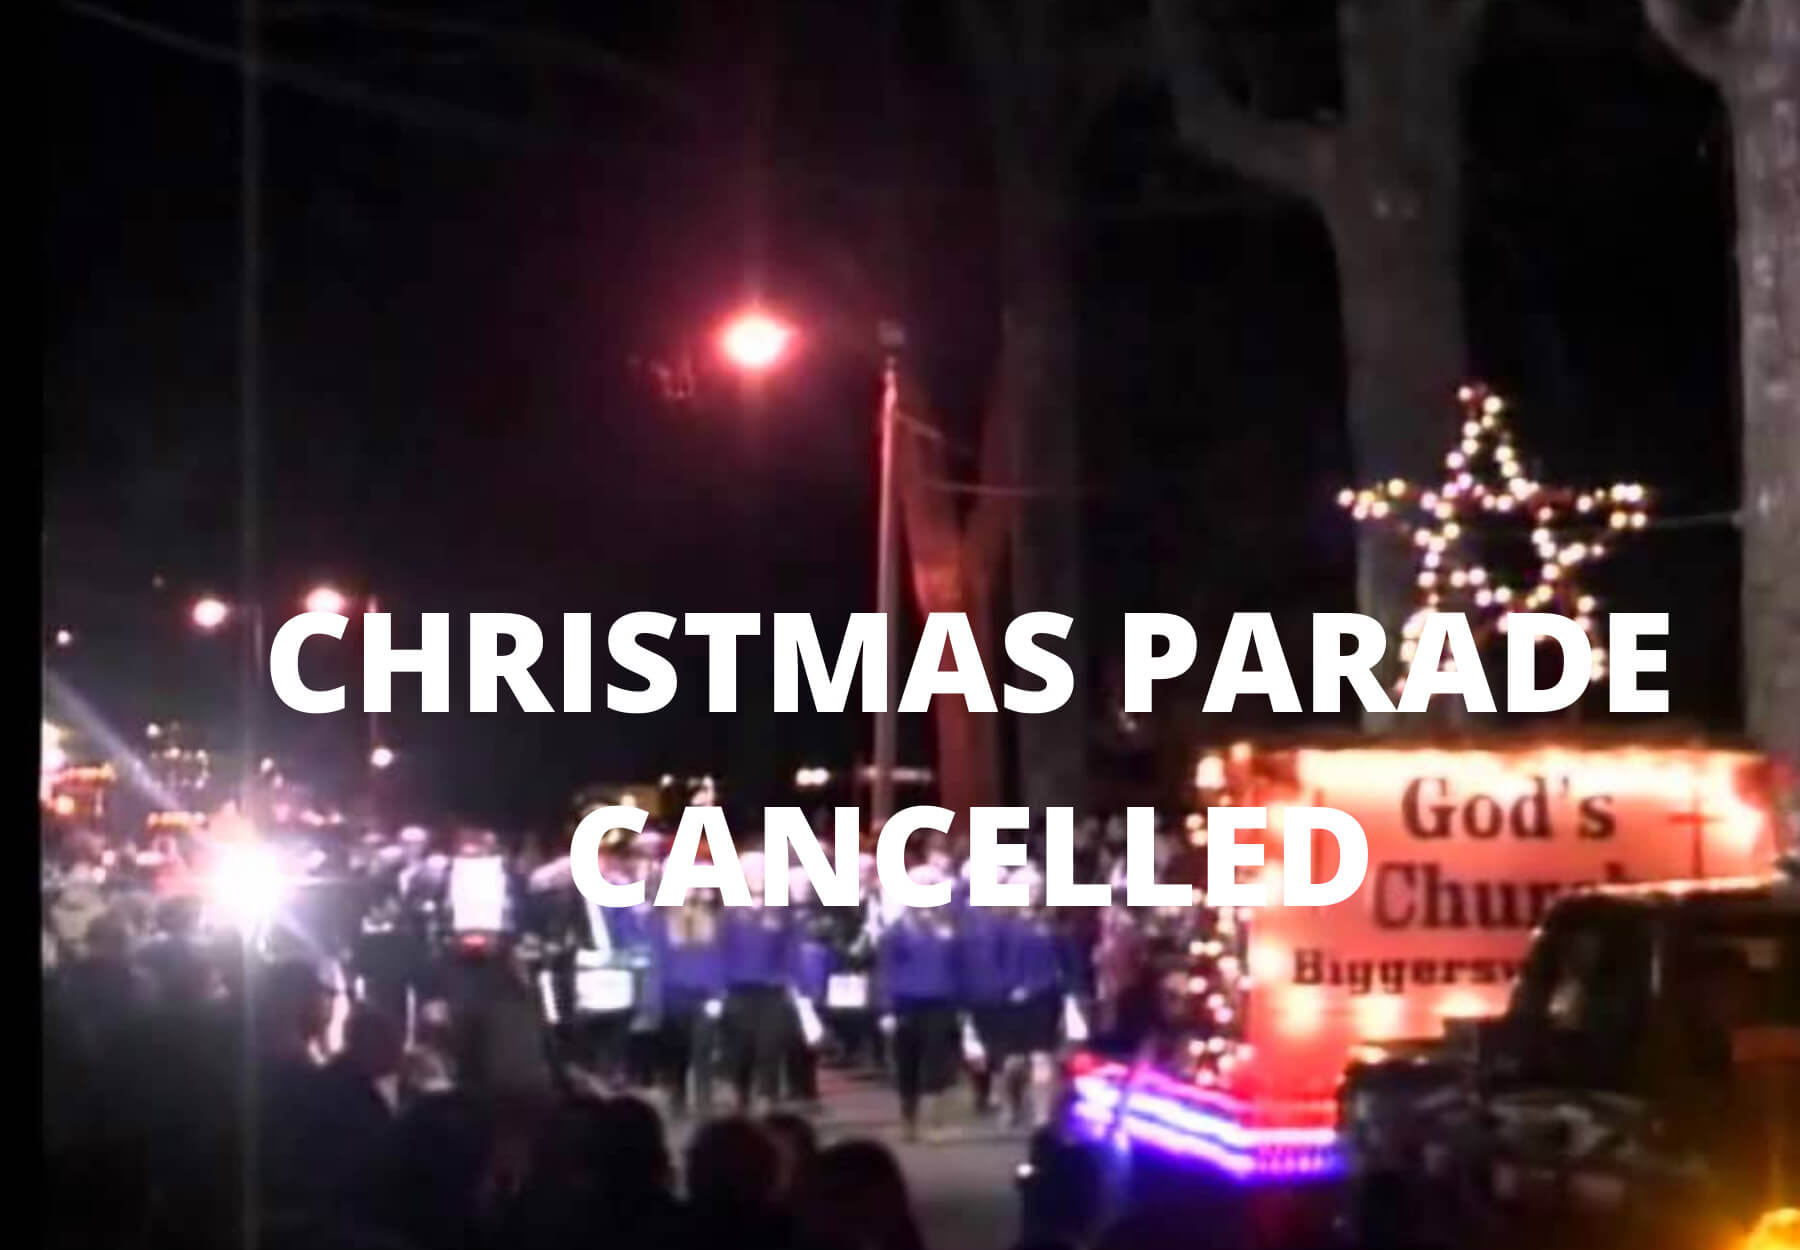 Corinth Christmas parade cancelled due to new restrictions